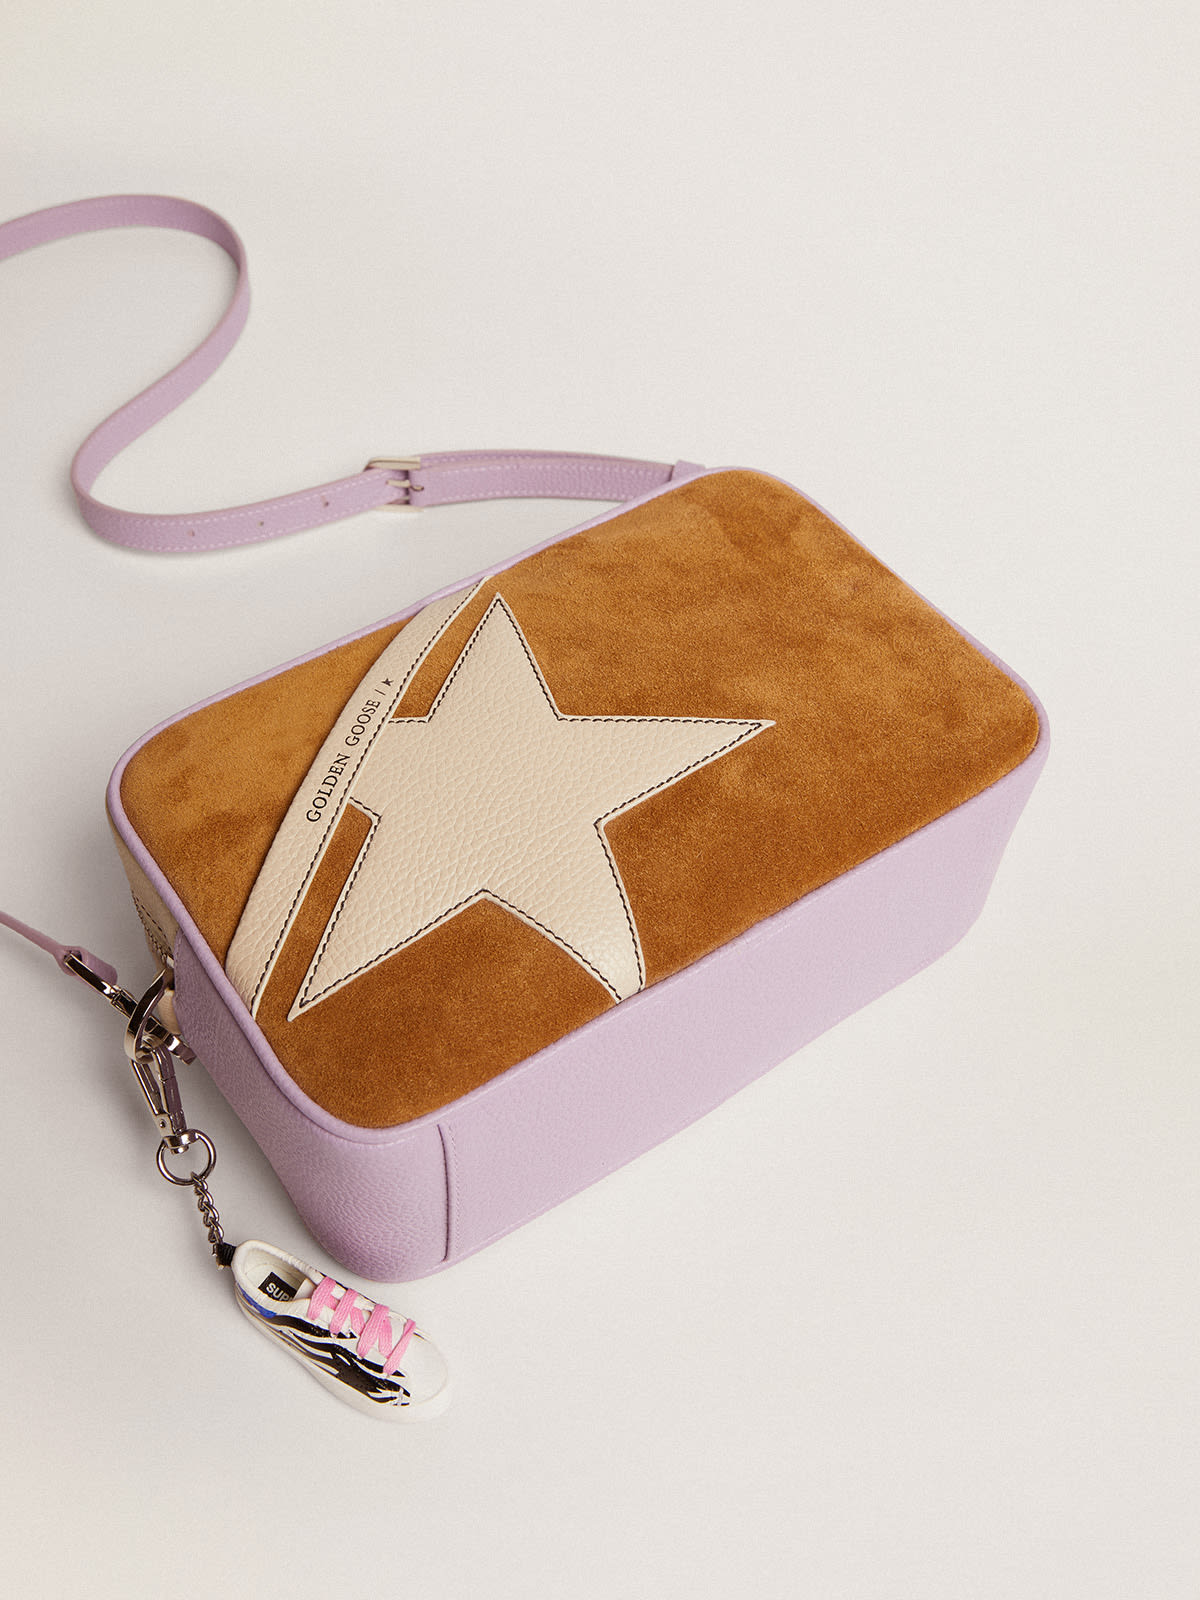 Golden Goose - Star Bag in white and lilac hammered leather with camel-colored suede insert and white leather star with contrast stitching in 